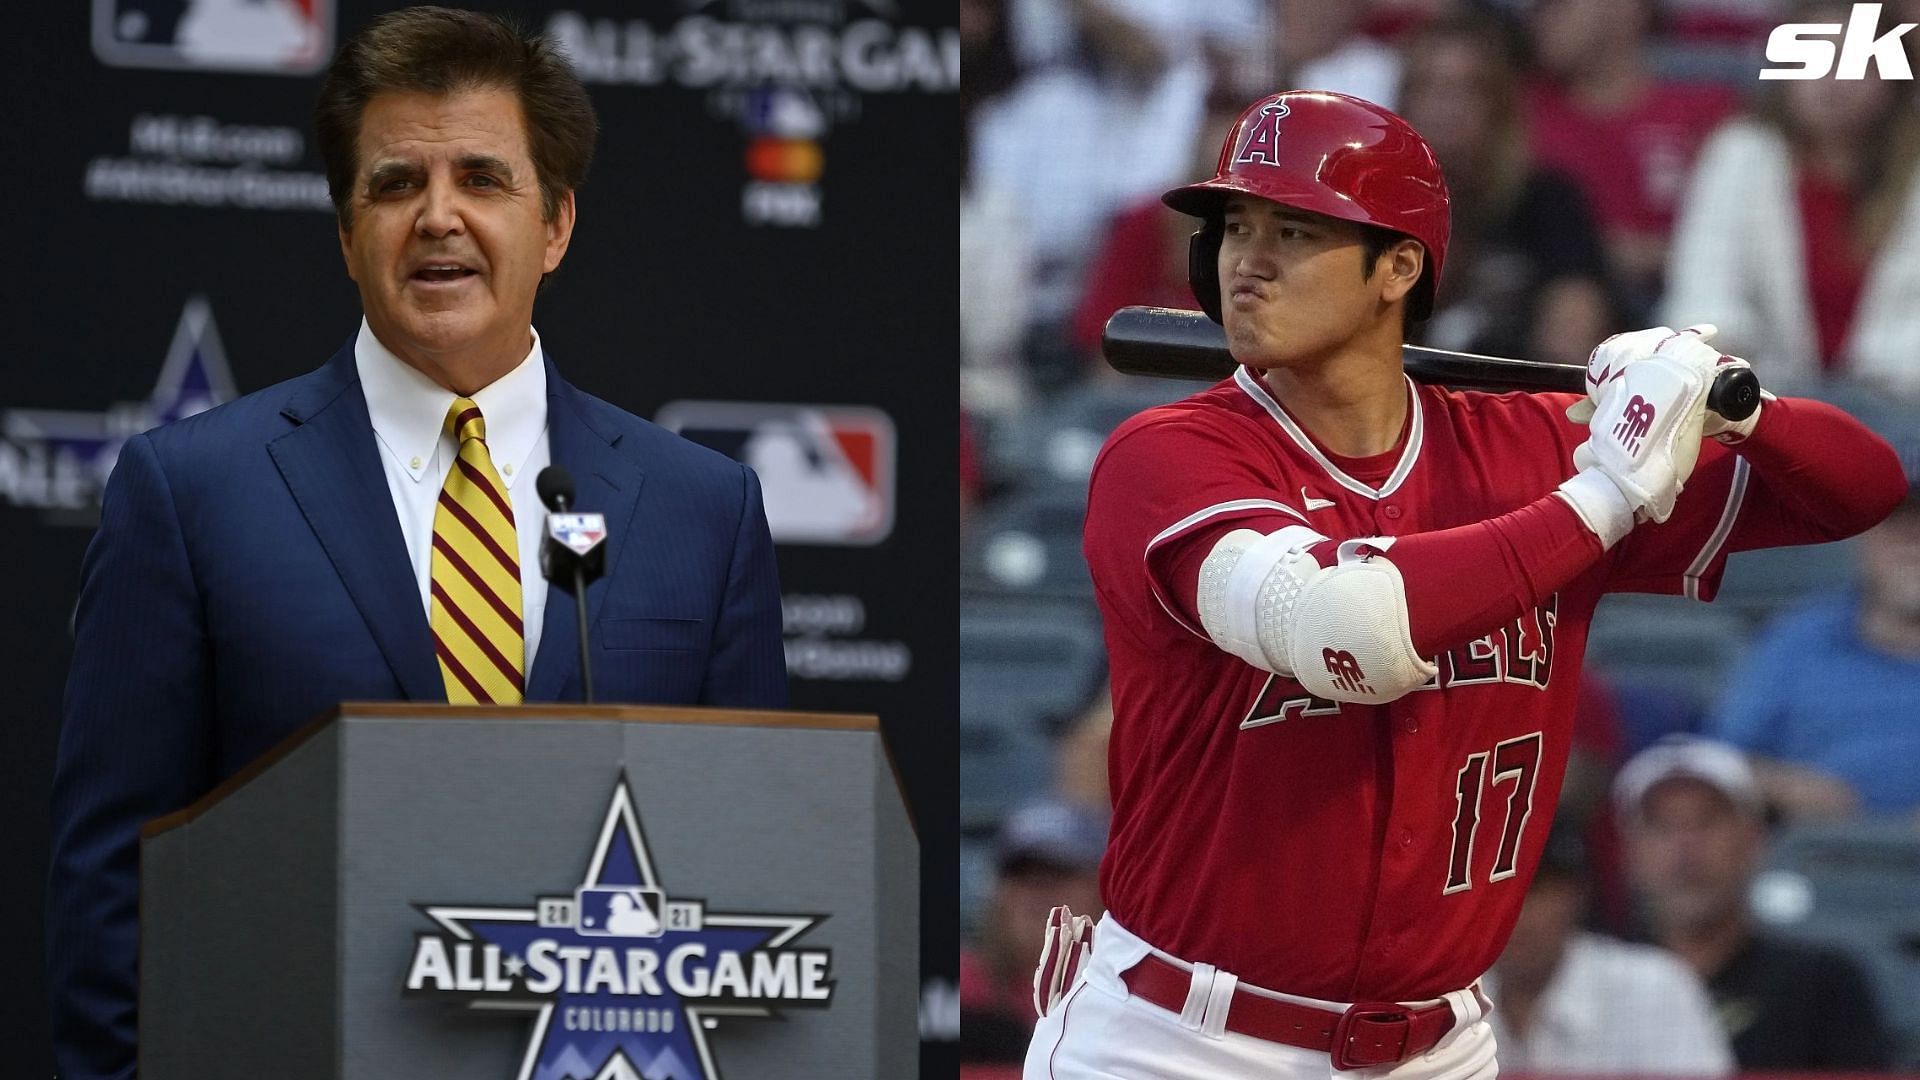 Brian Kenny proposed a very lower contract offer for Shohei Ohtani